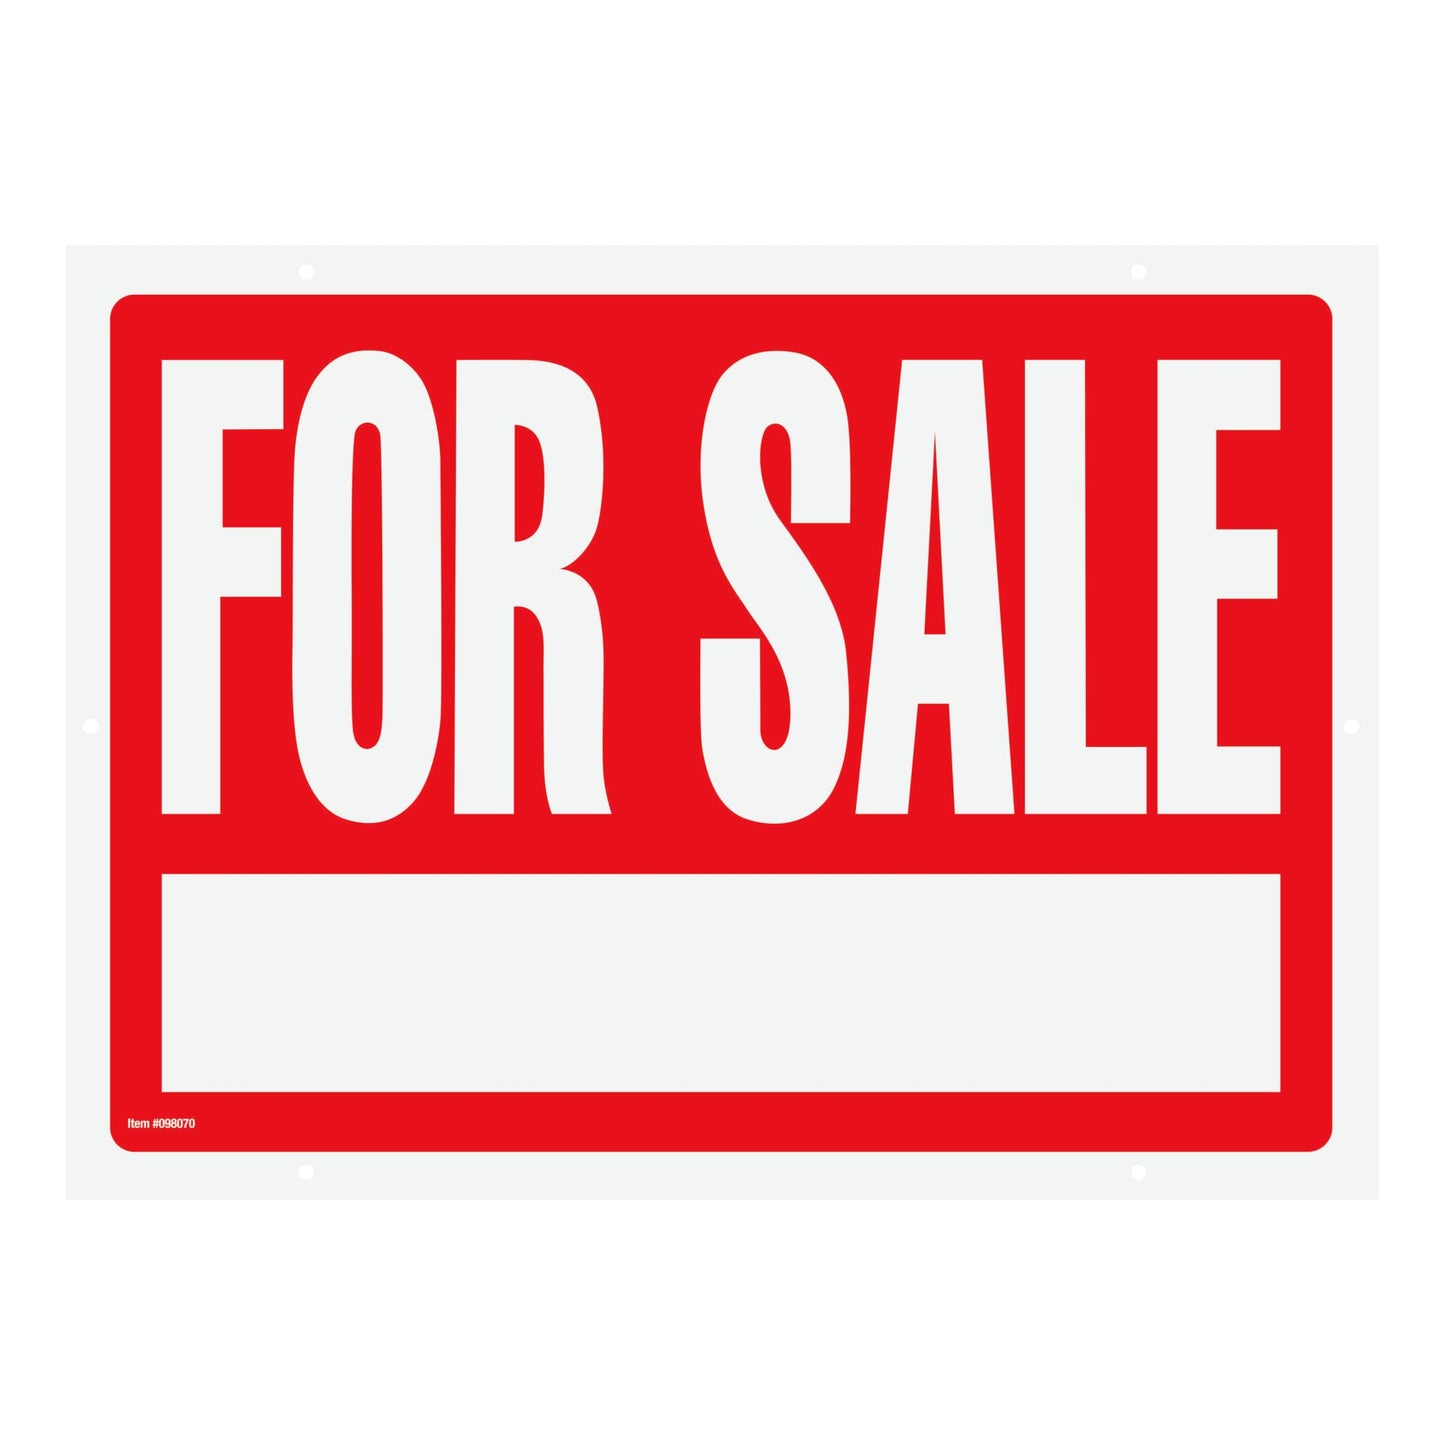 Cosco For Sale Sign Kit with 1 1/2" Letters, Two-Sided, 16" x 22 1/2", Red Sign with White Text (098070)